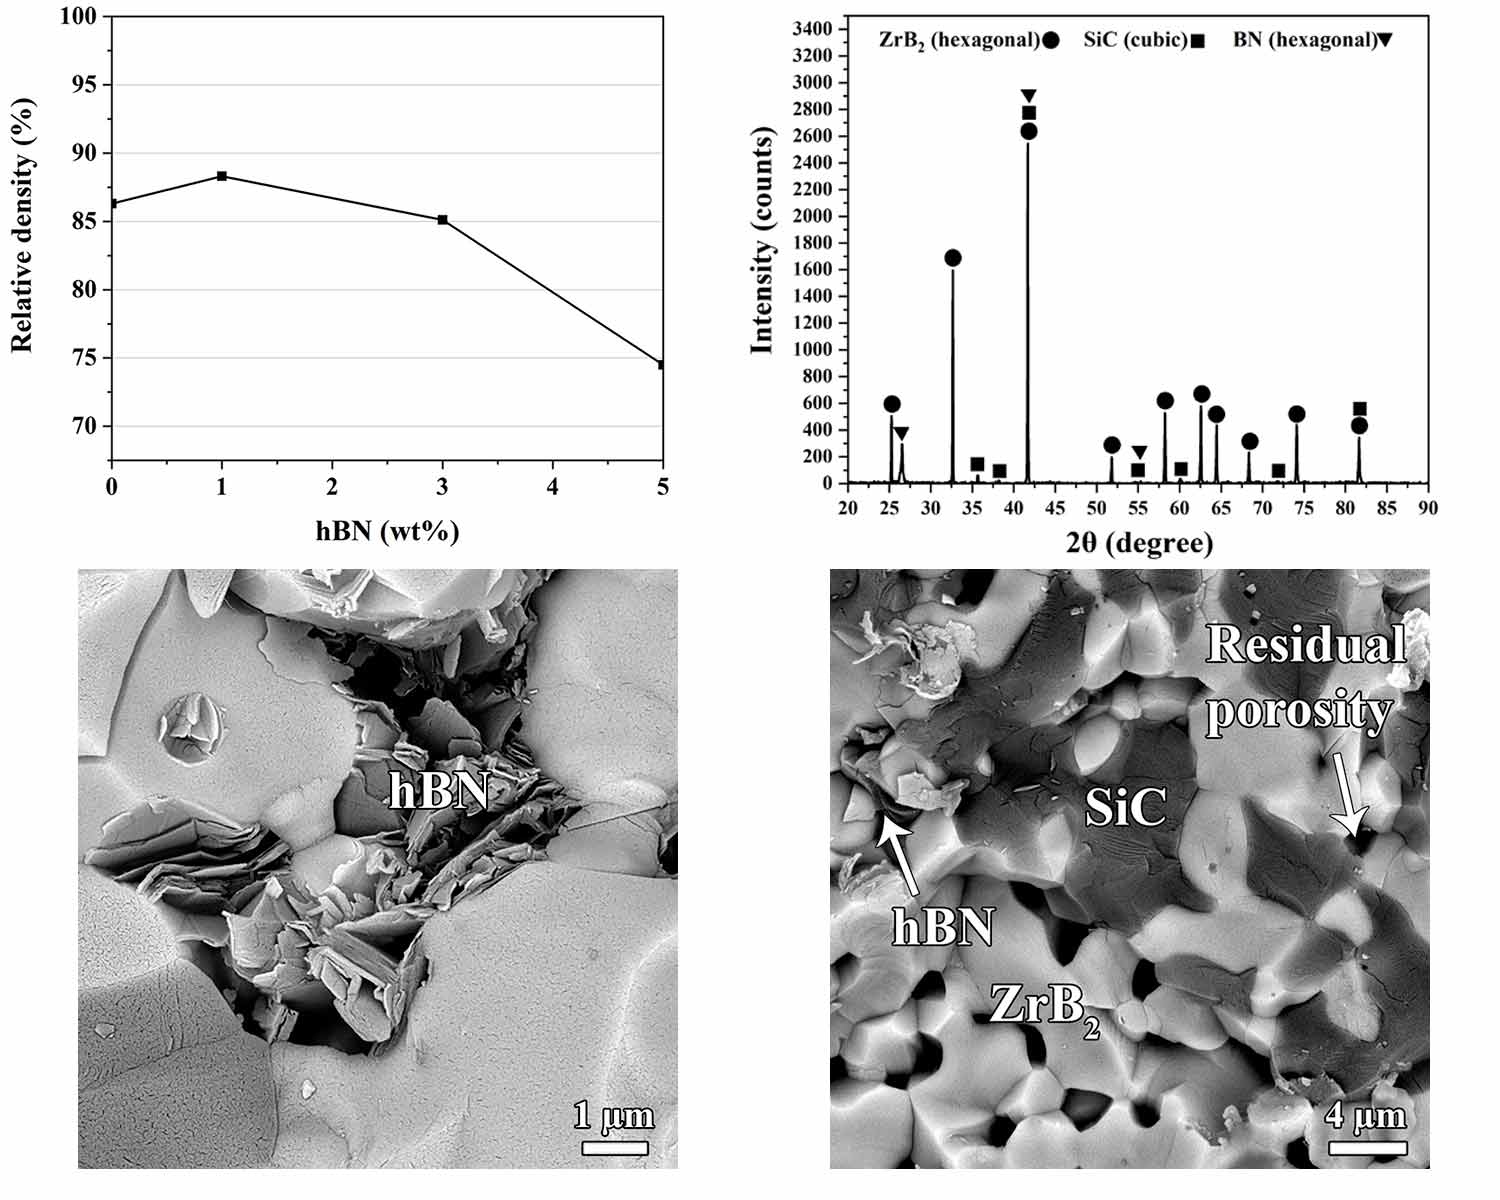 Pressureless sinterability study of ZrB2–SiC composites containing hexagonal BN and phenolic resin additives